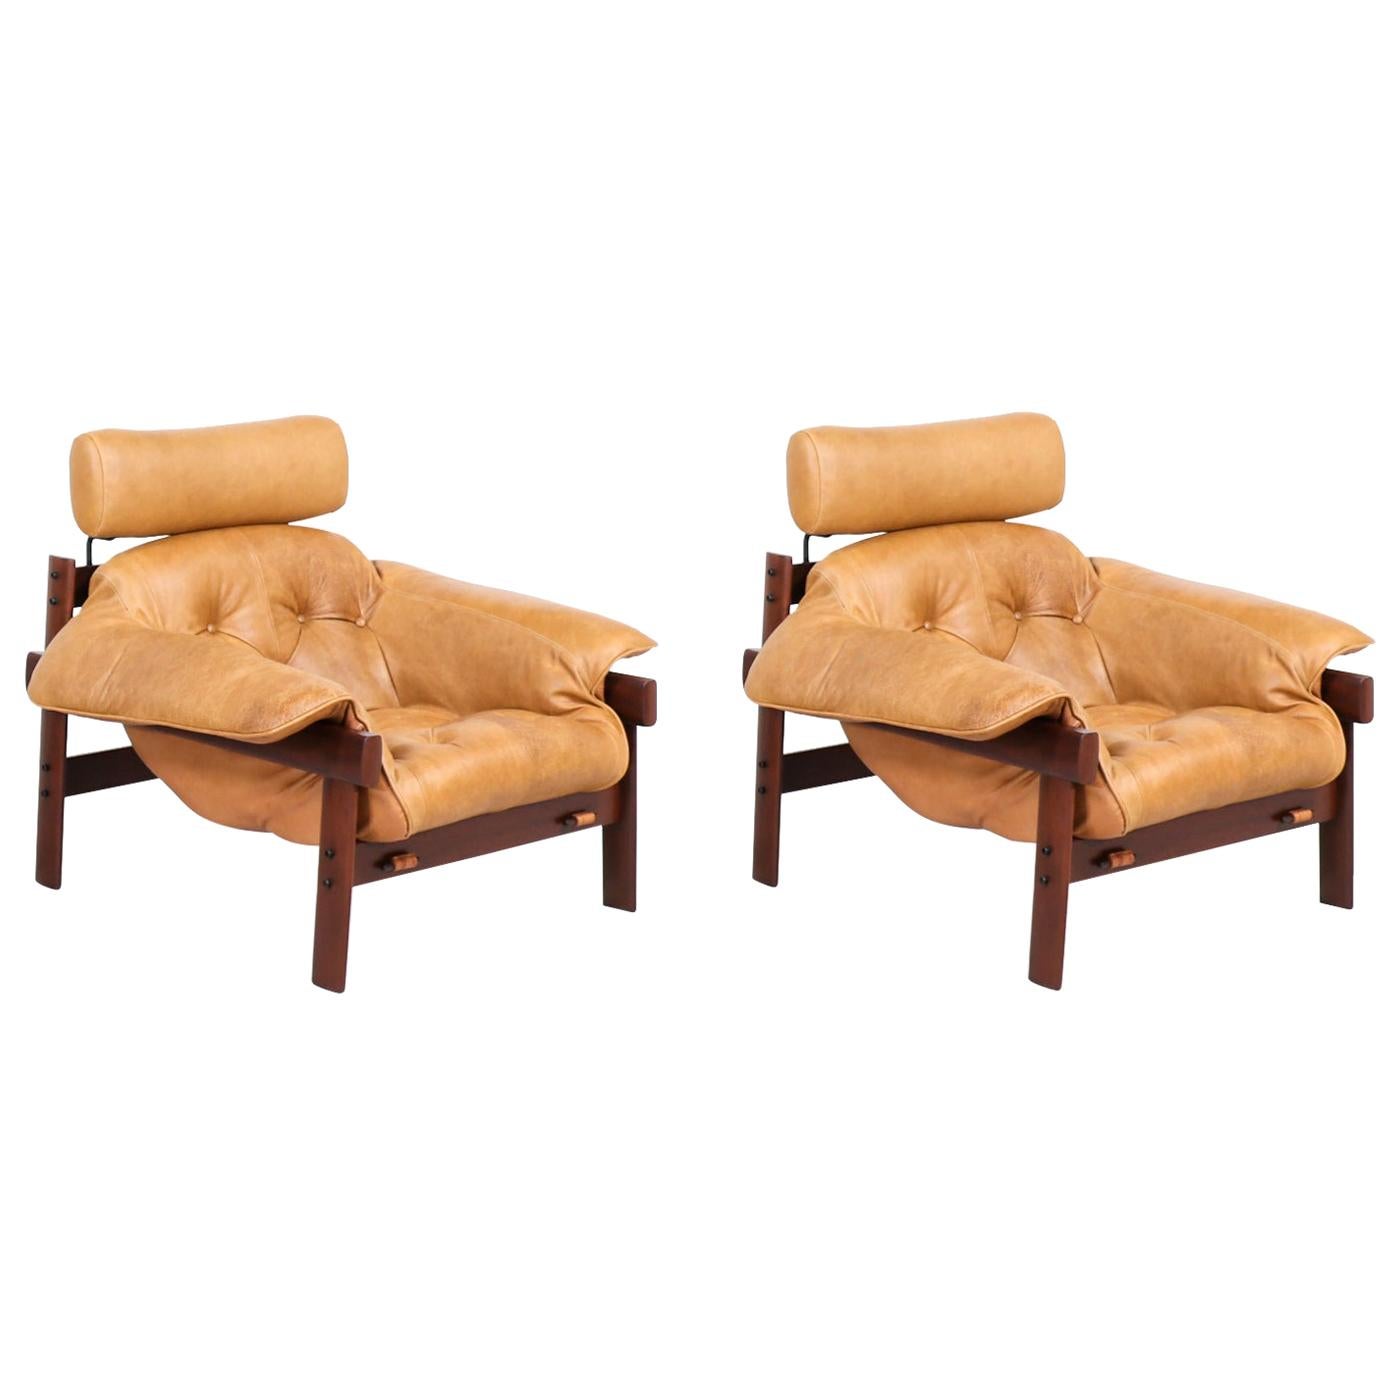 Percival Lafer MP-41 Series Brazilian Leather Lounge Chairs